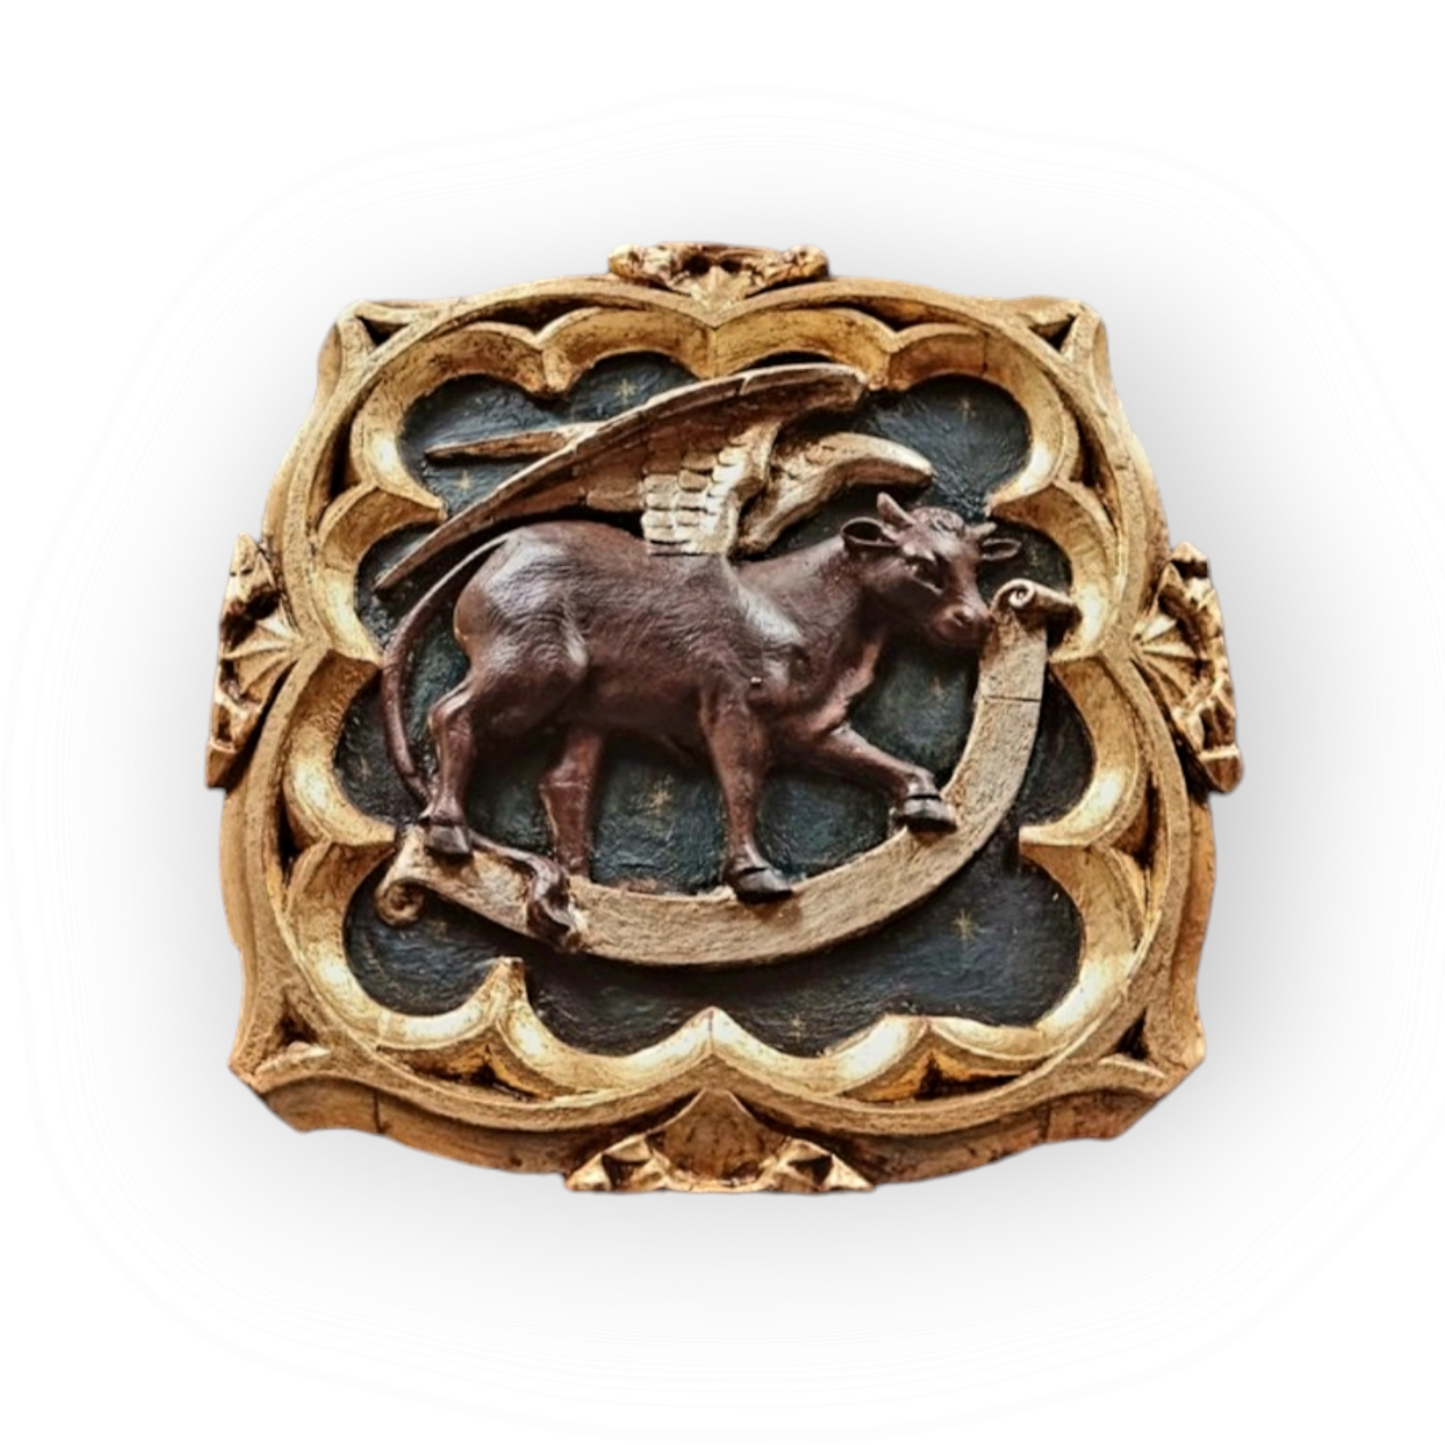 Large Late 18th Century Italian Antique Carved Wood Panel of a Winged Ox, The Symbol of Saint Luke